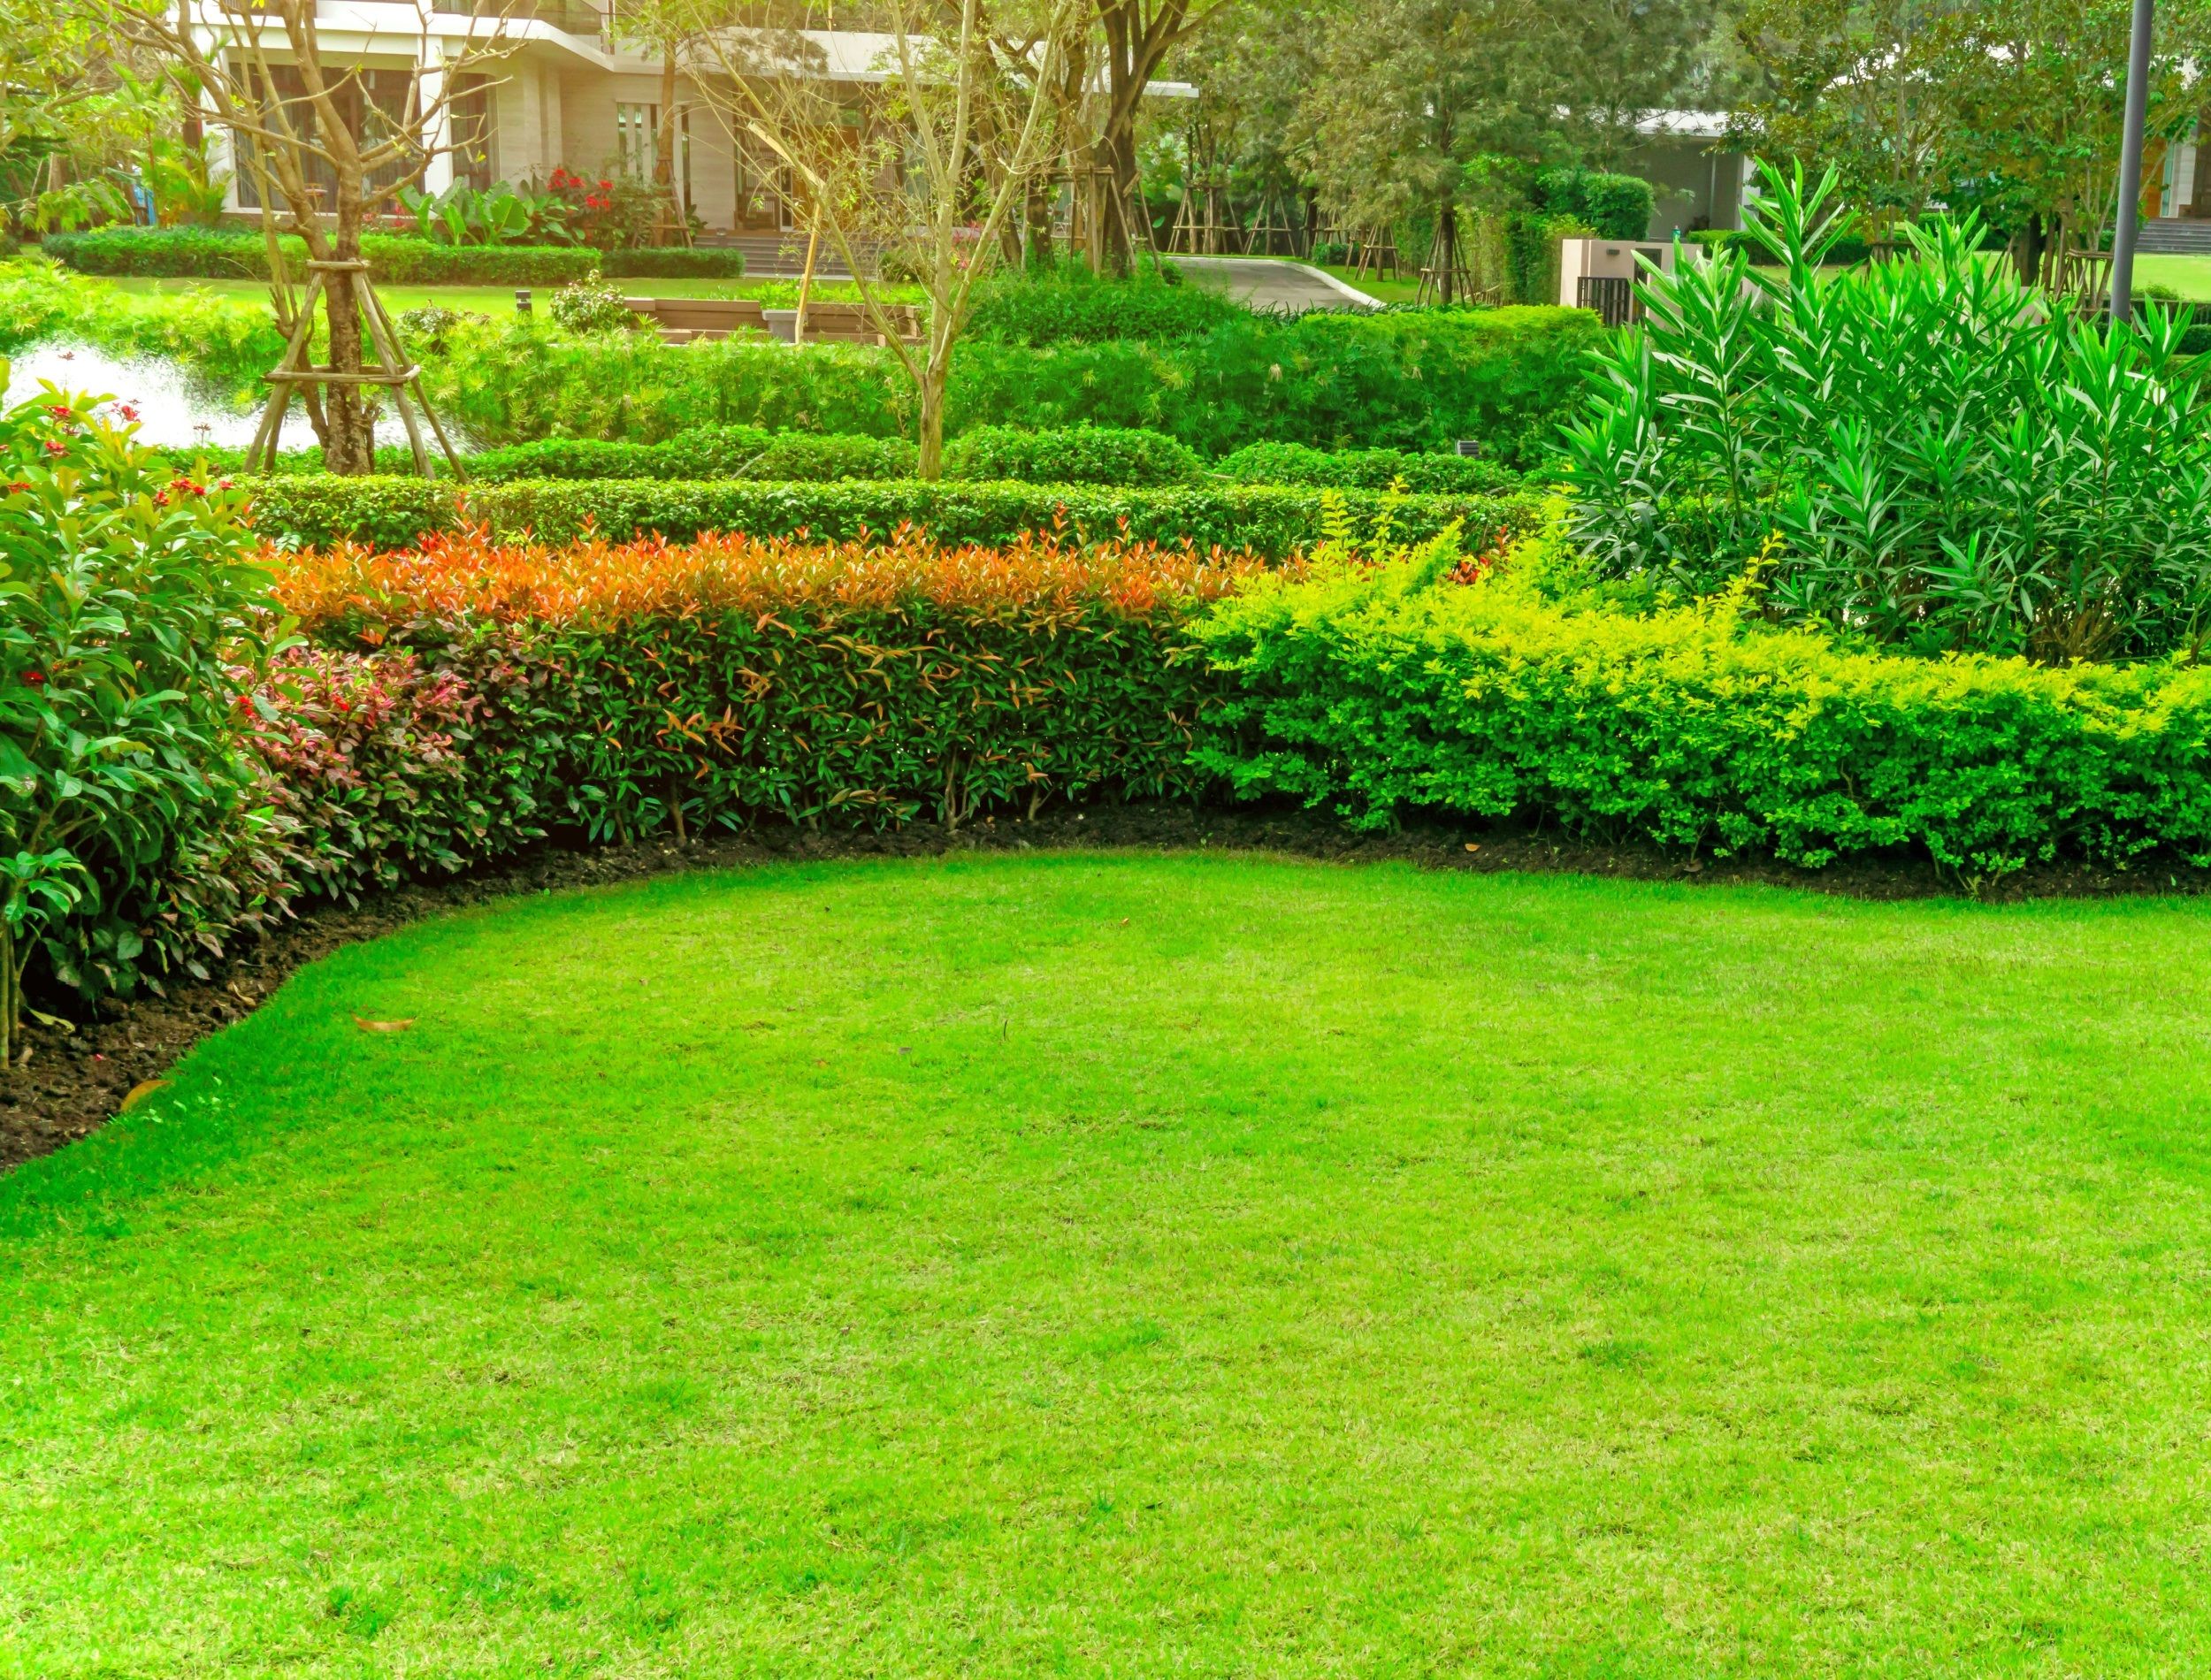 Fresh green Bermuda grass smooth lawn as a carpet with curve form of bush, trees on the background, good maintenance landscapes in a luxury house's garden under morning sunlight